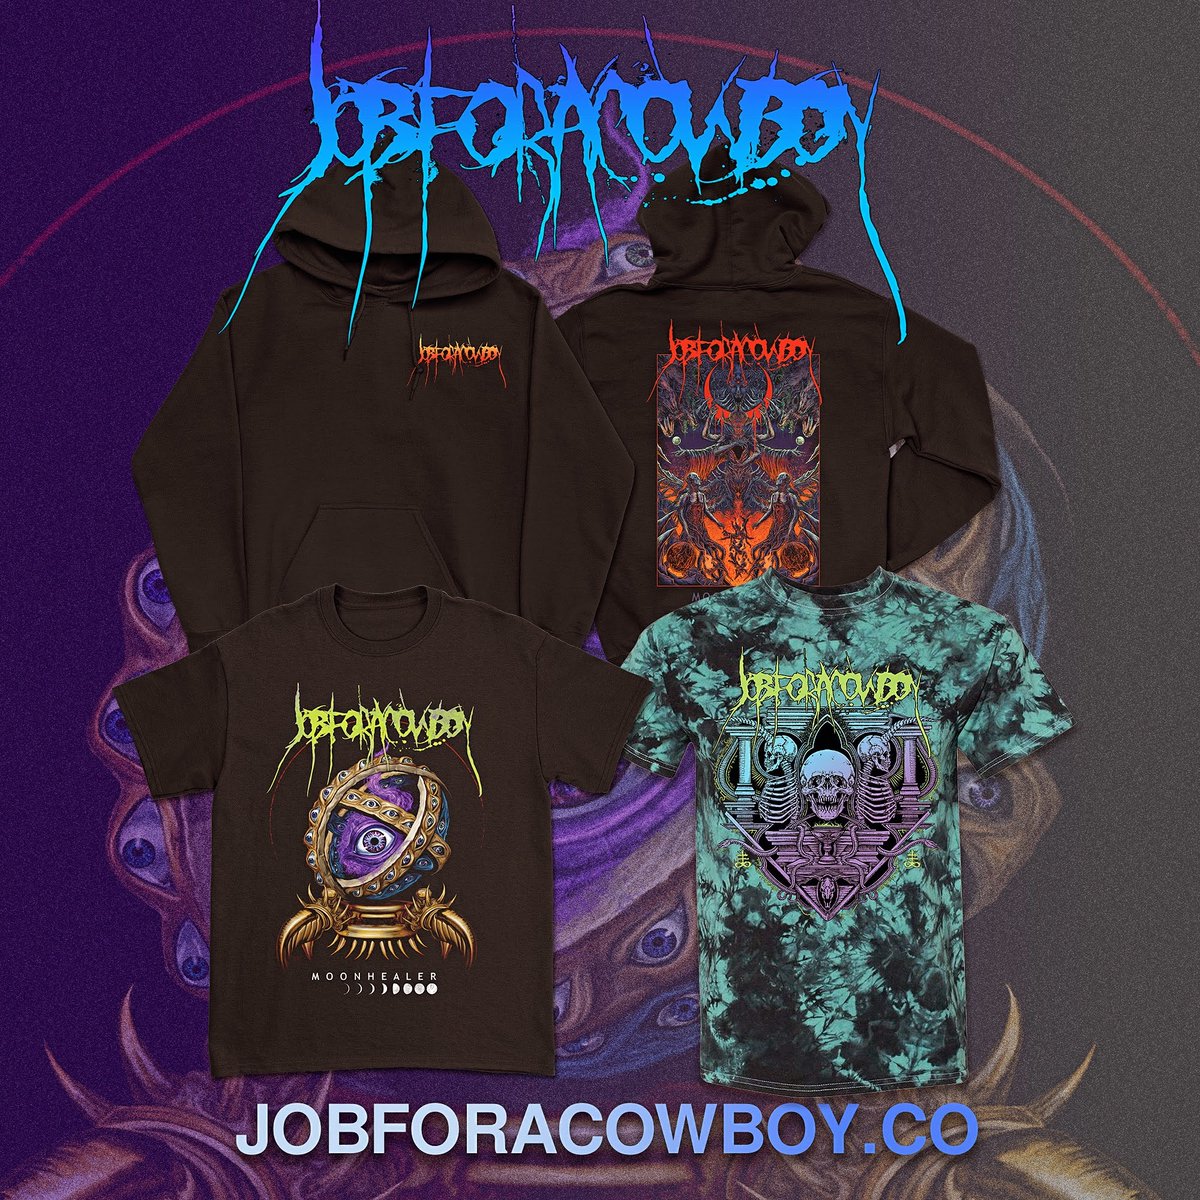 🔥 Black Friday Metal Madness! 🤘 New brutal merch just dropped at JobForACowboy.co. 🖤 Get your shred on - limited stock! 💀 #MetalMerch #BlackFridayShred #jobforacowboy #jfac #deathmetal